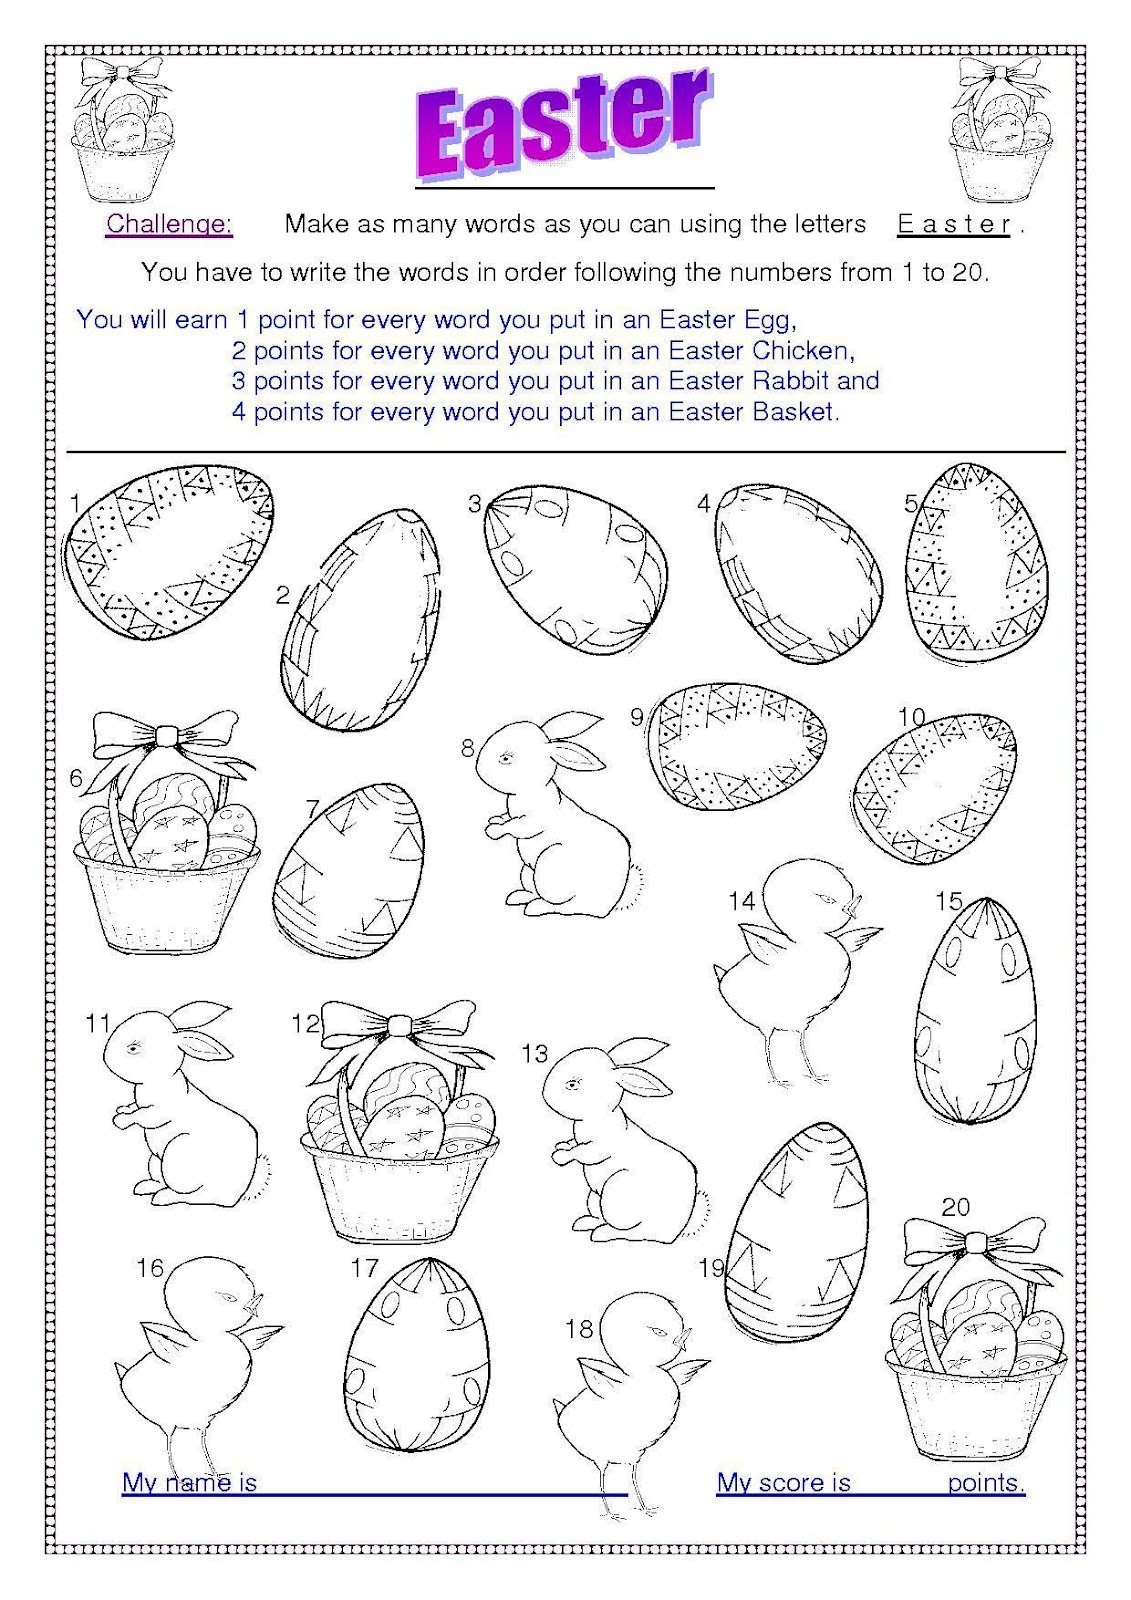 printable-coloring-pages-for-easter-religious-at-coloring-page